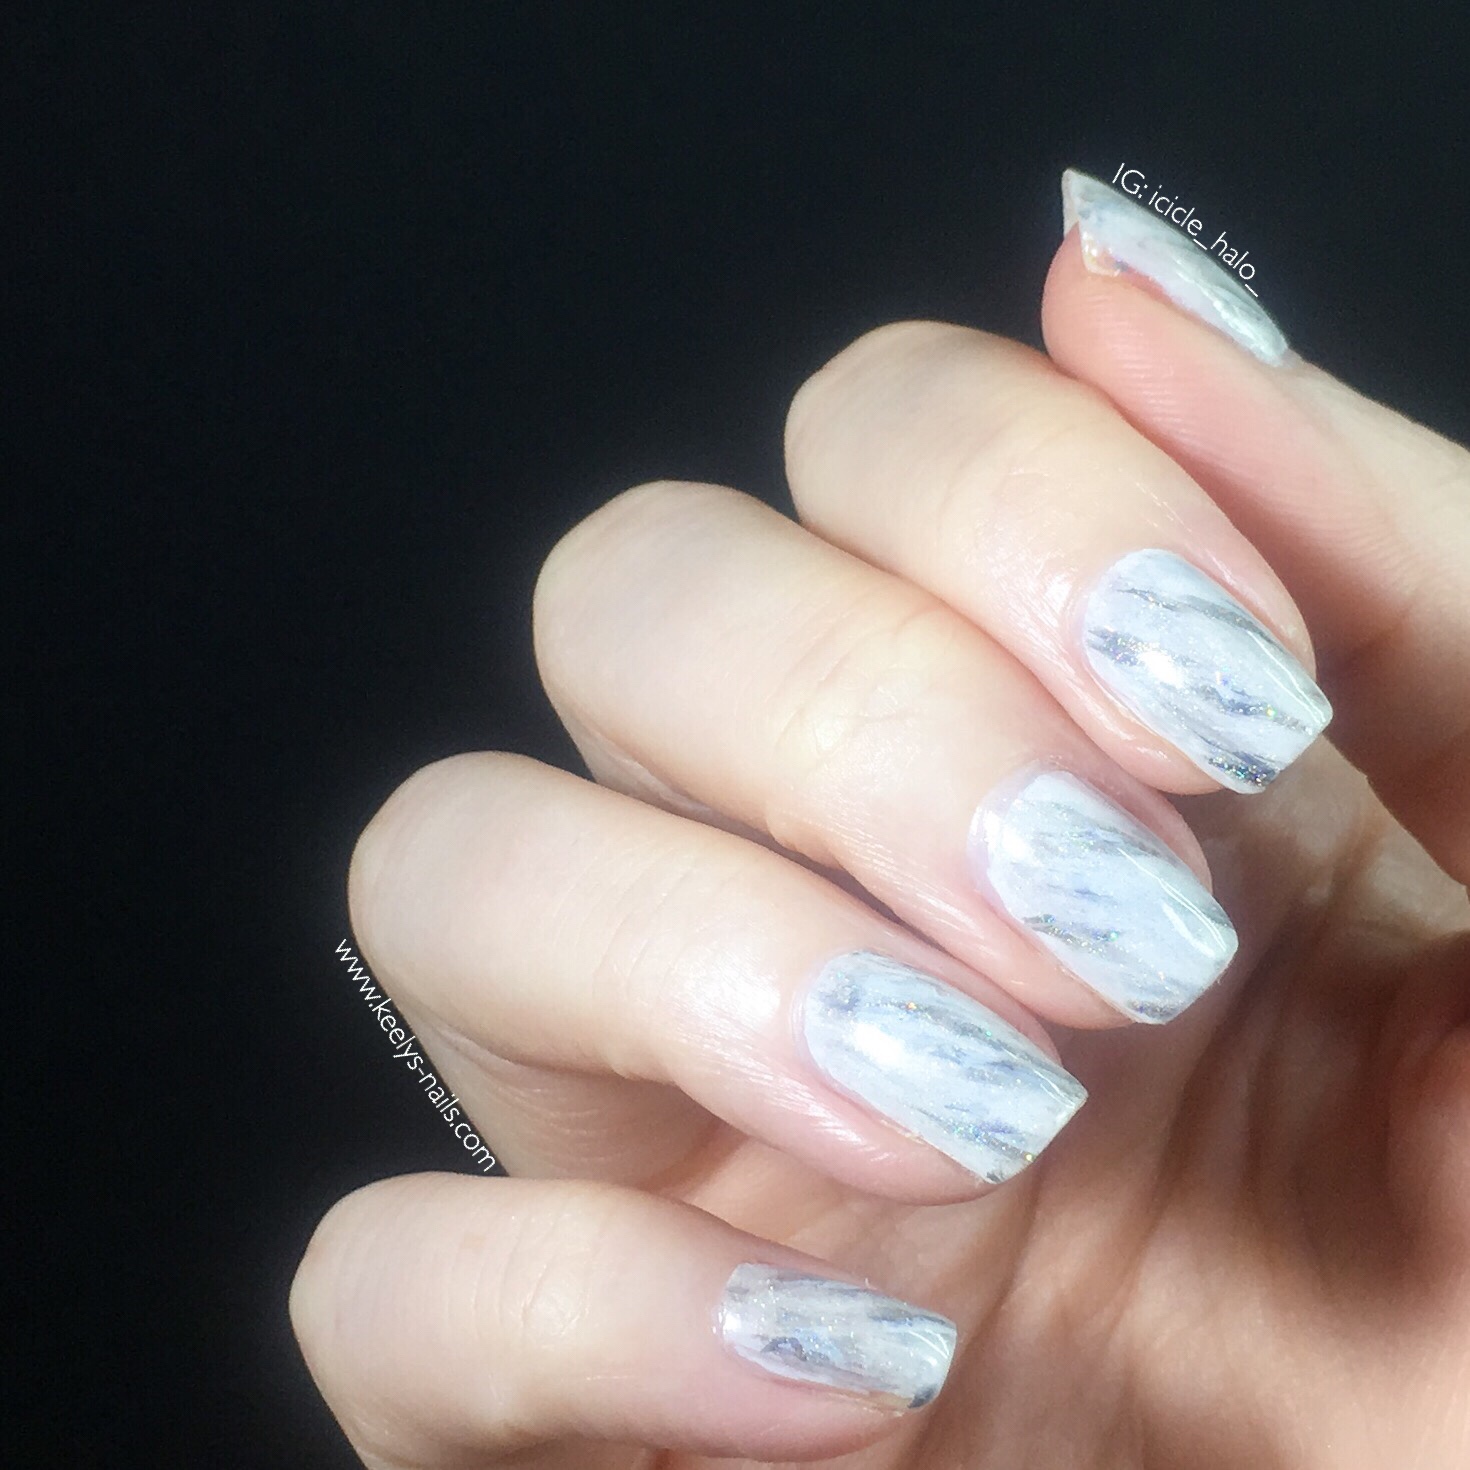 Right hand featuring white marble nail art